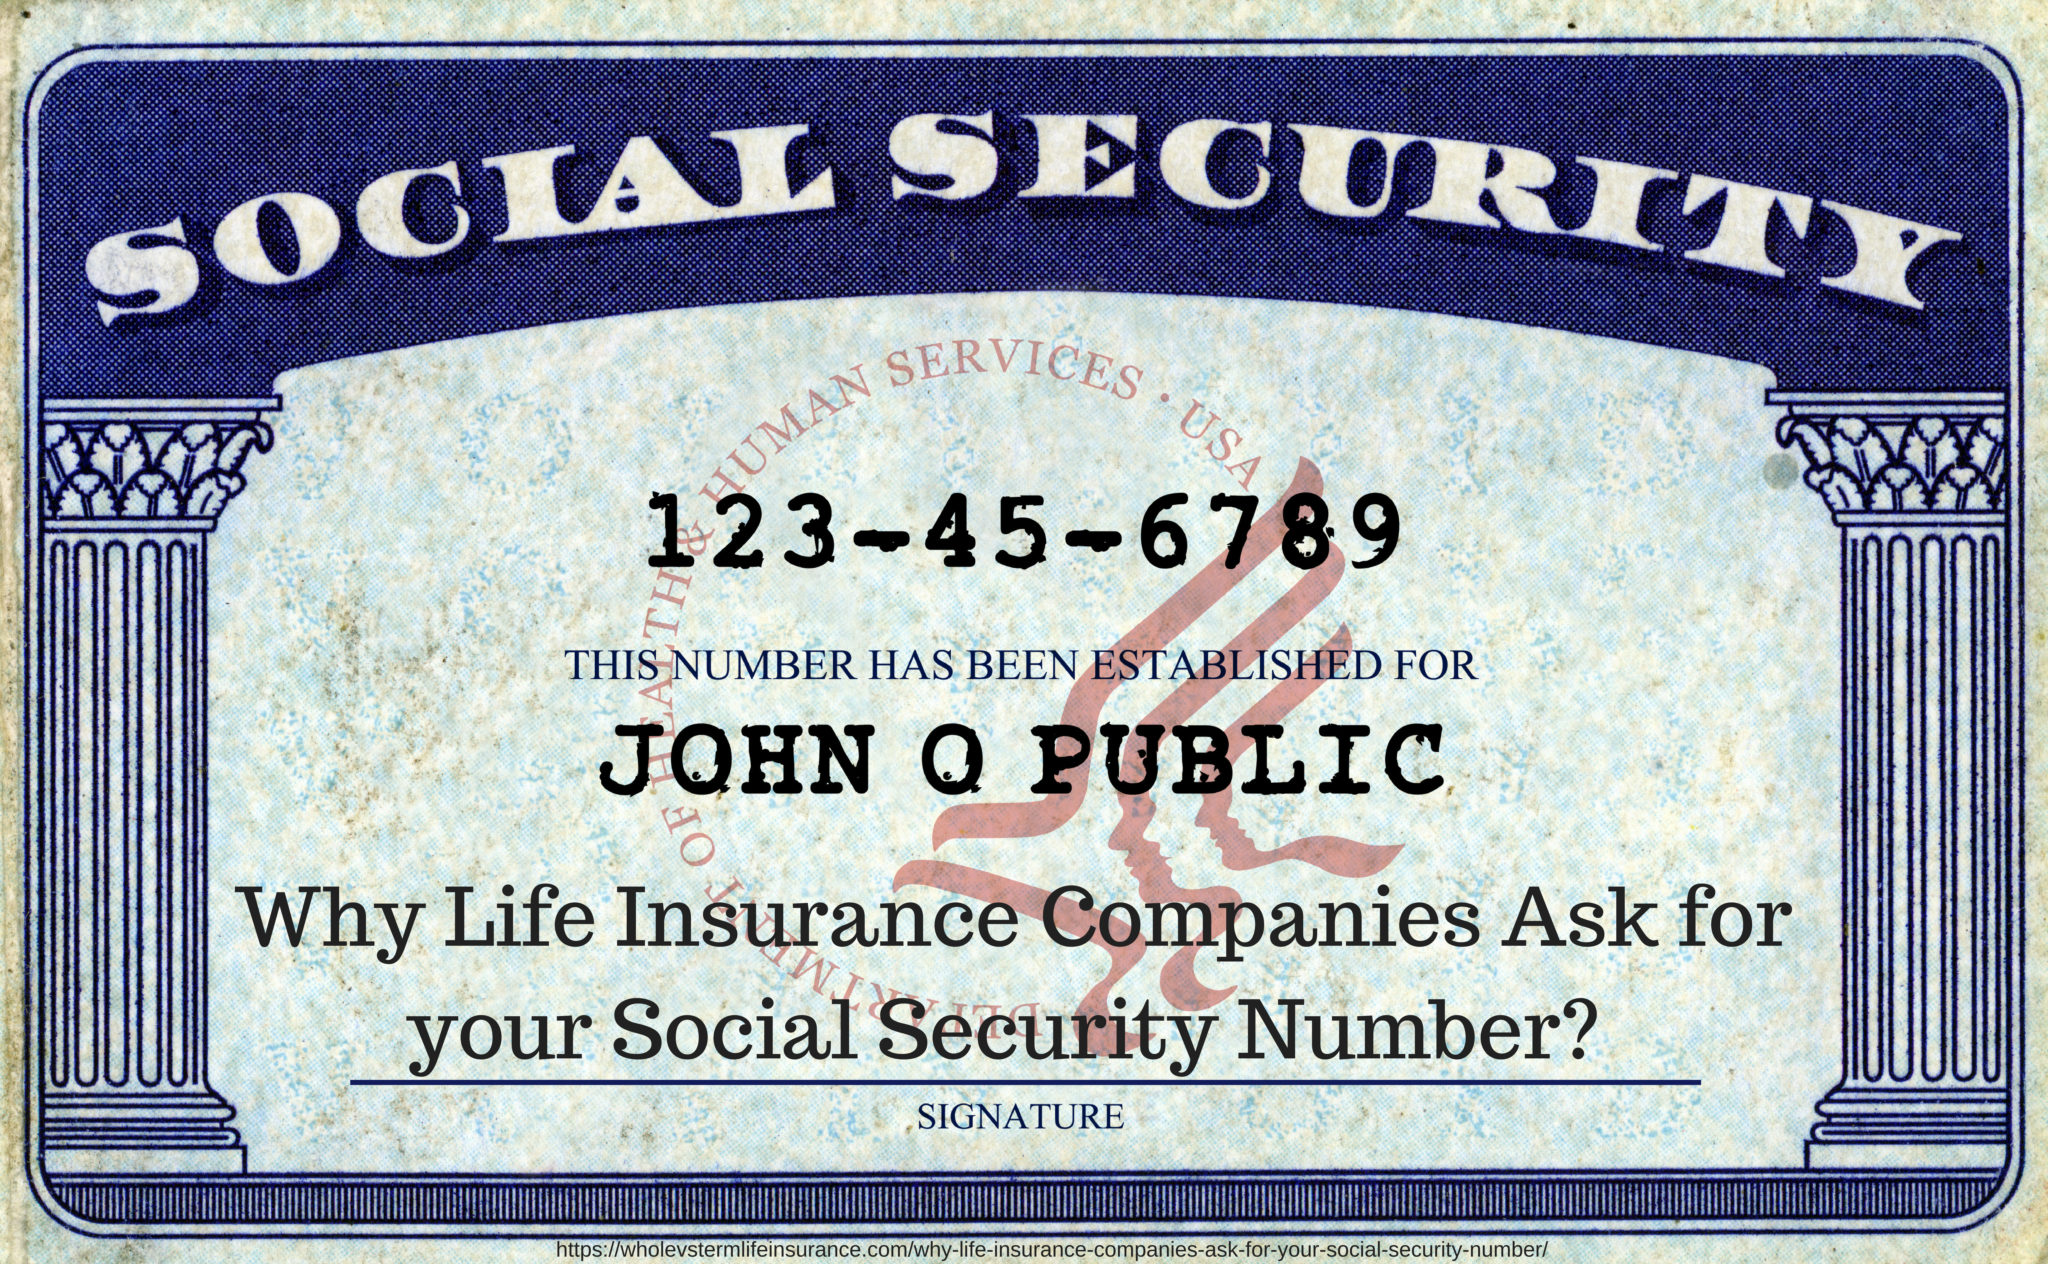 Why Life Insurance Companies Ask for your Social Security Number